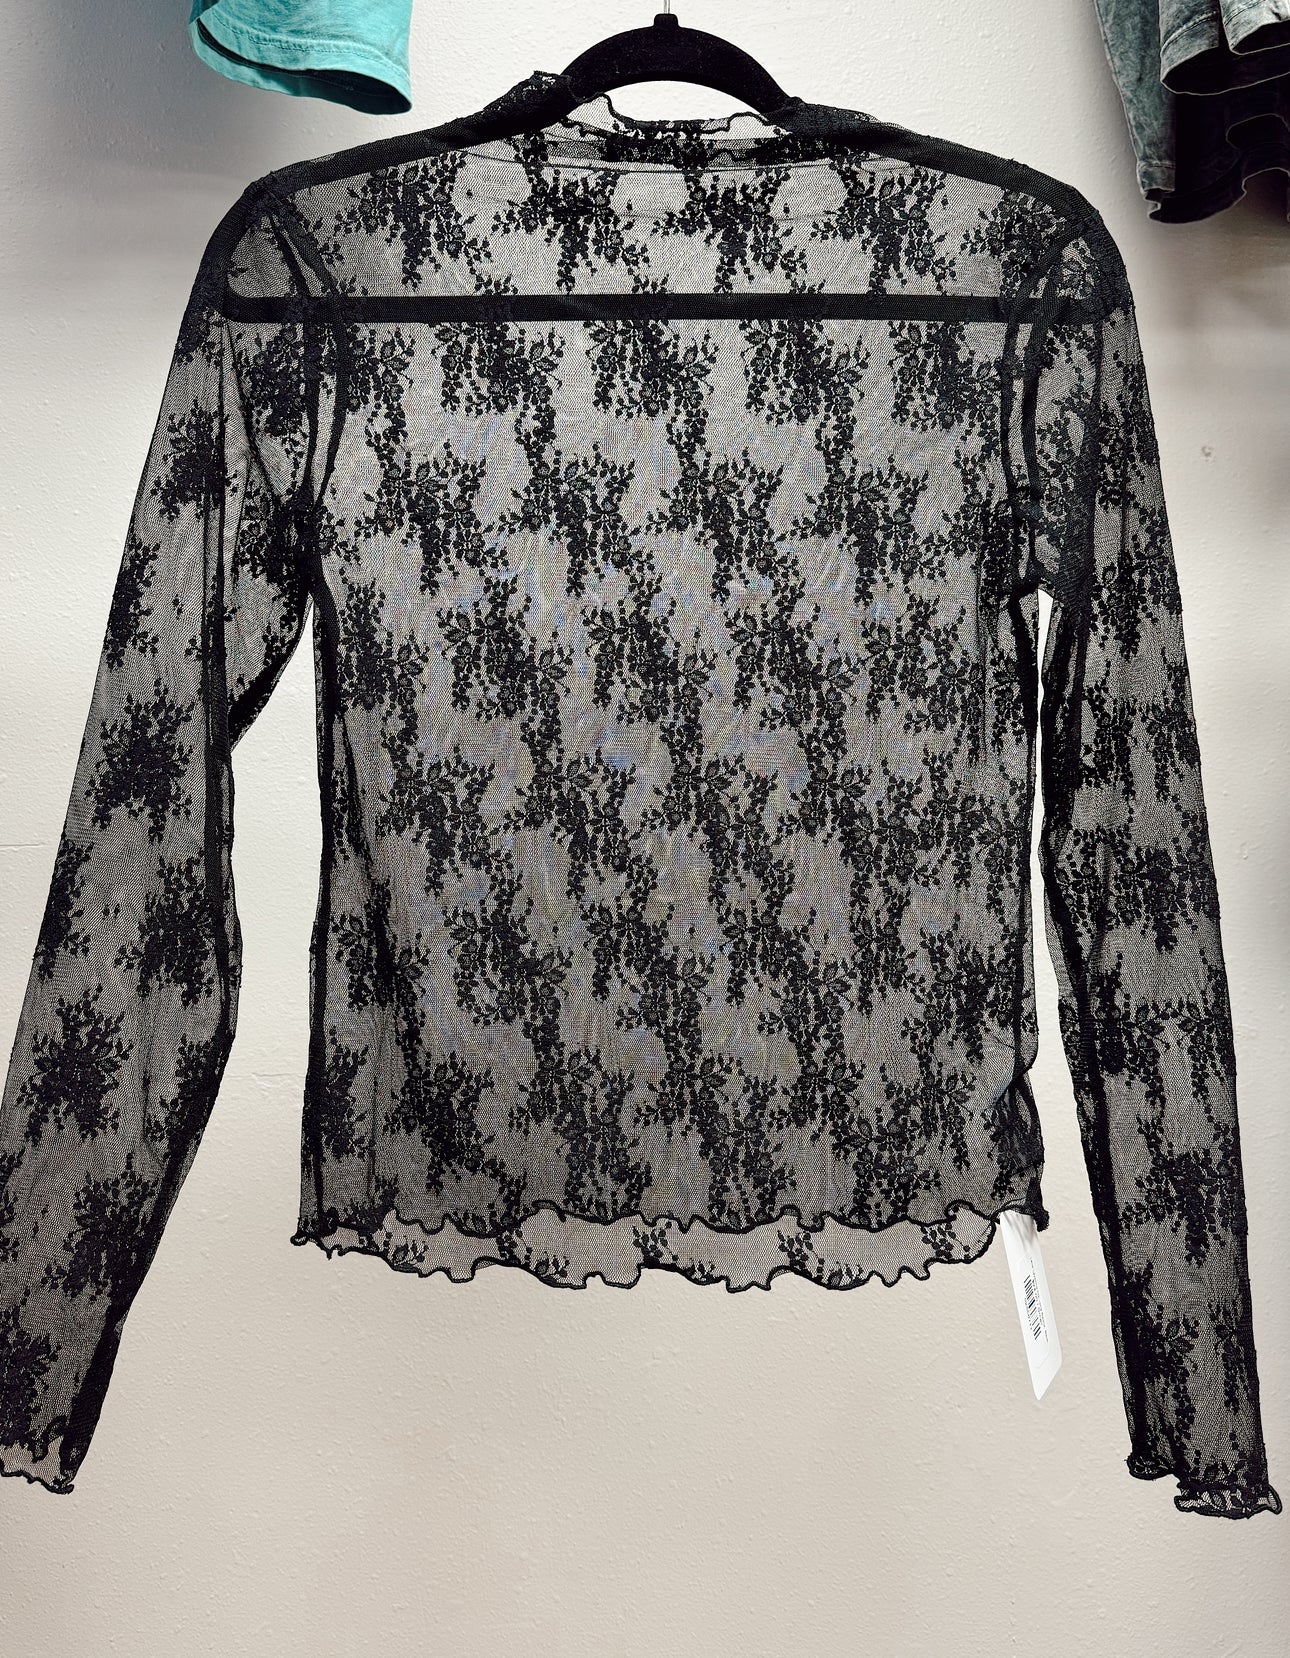 Lace Layering Top Long Sleeve, Black